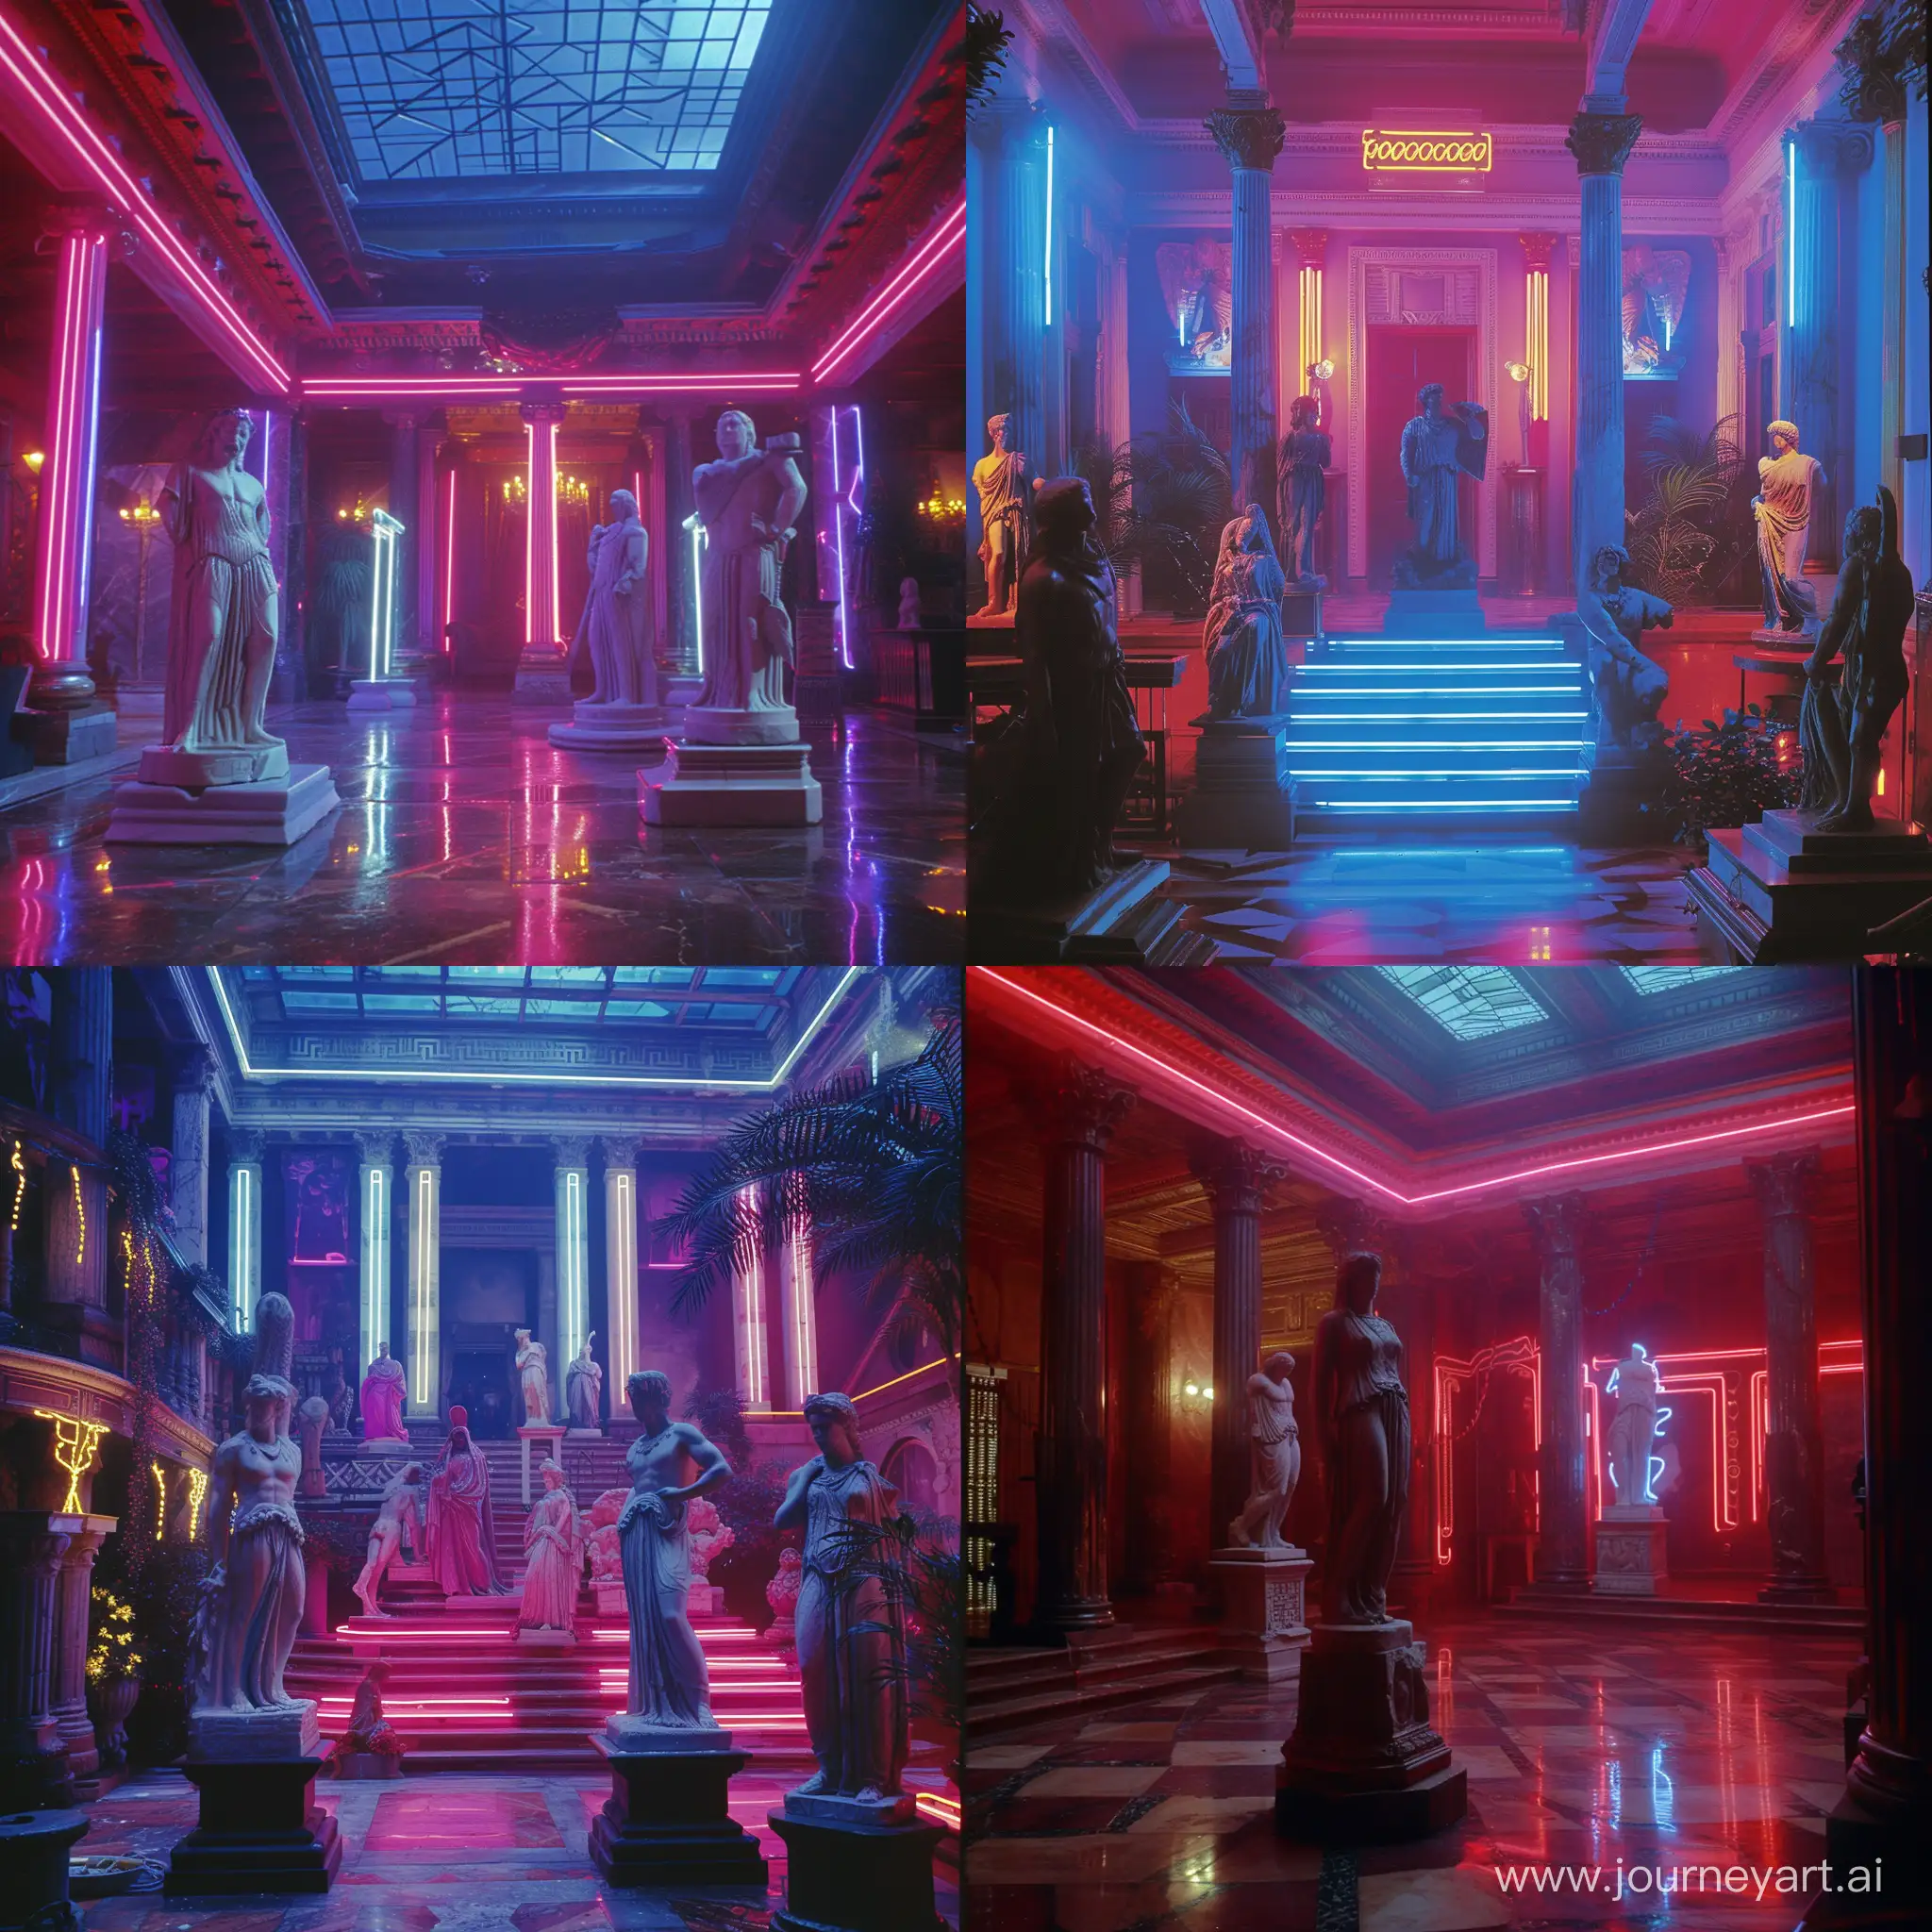 Cinematic scene from a John Carpenter film from the 1980s showing a millionaire's house with ancient Greek style and decoration, with statues, neon lights